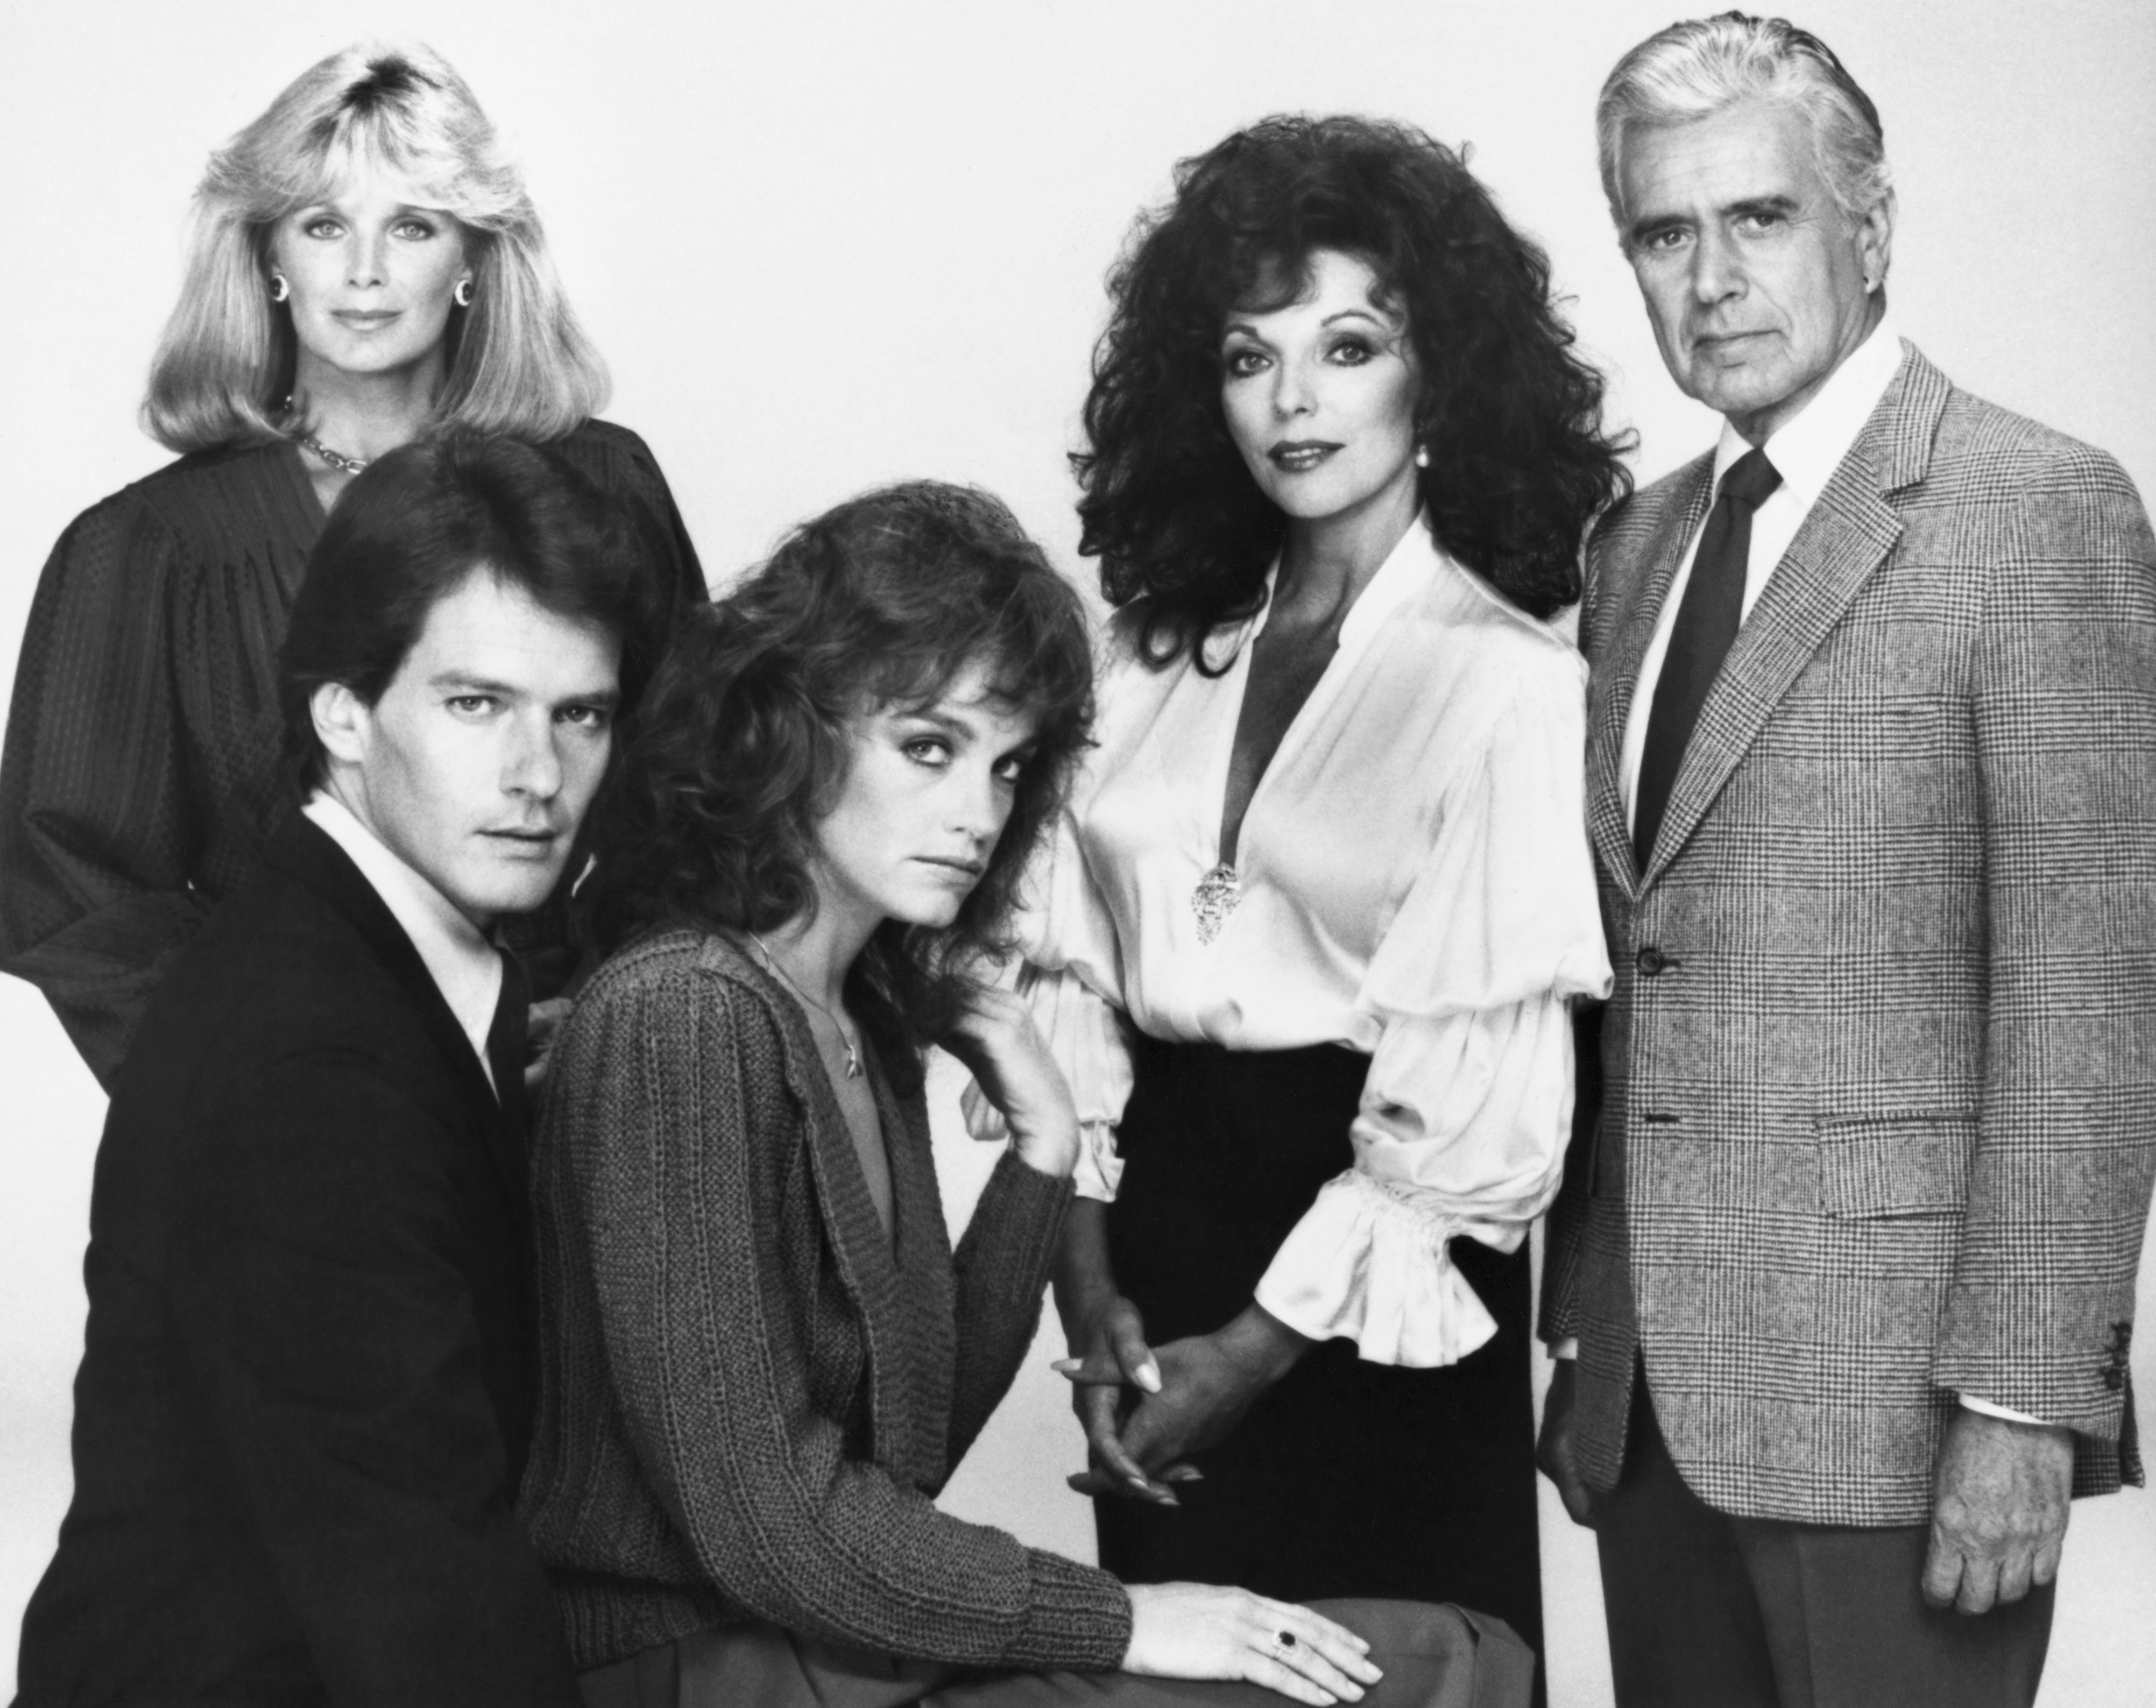 Studio photo of "Dynasty" cast taken on set in October 1981| Source: Getty Images